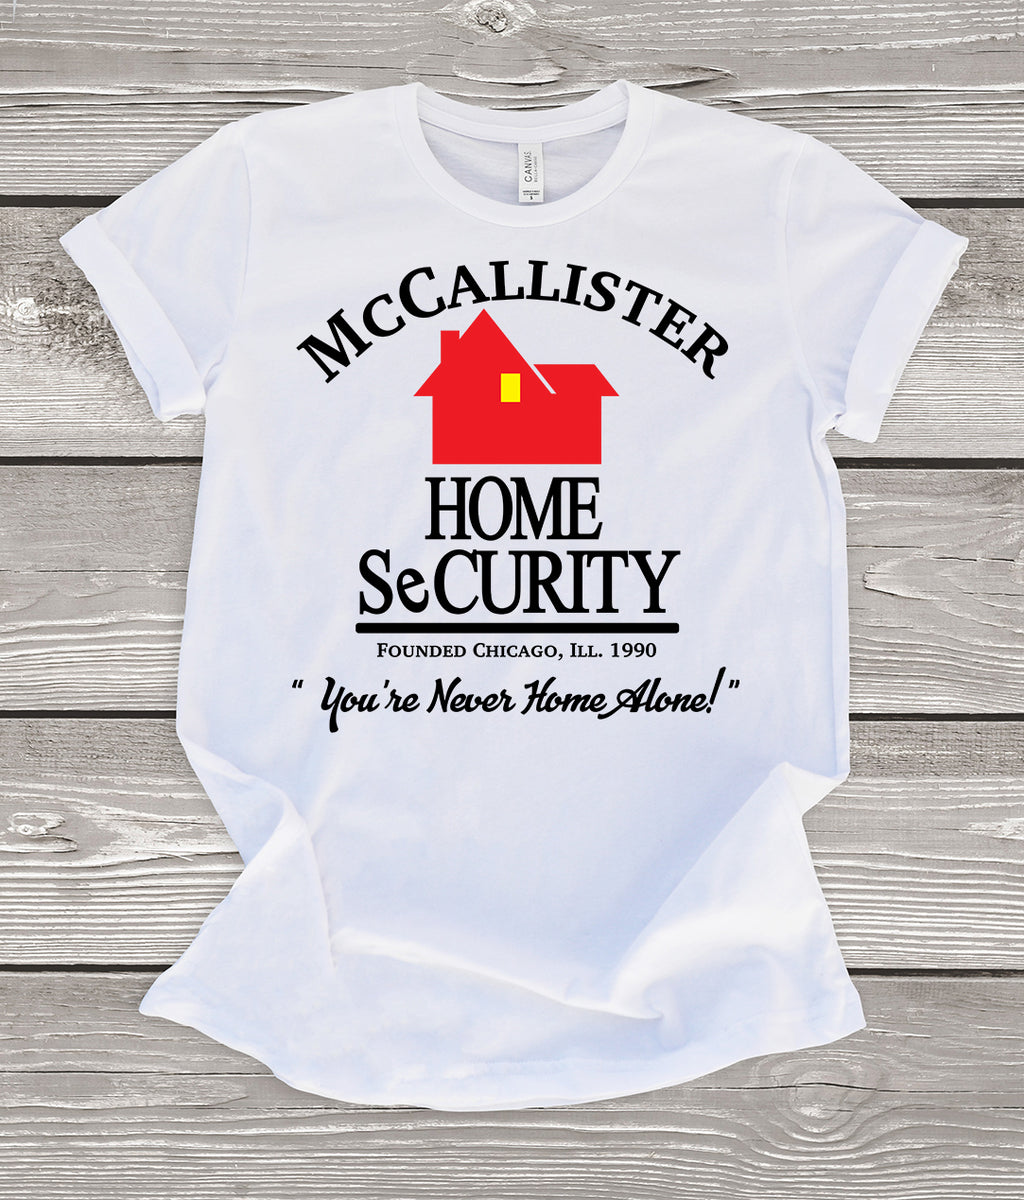 McCallister Home Security (Home Alone) T-Shirt